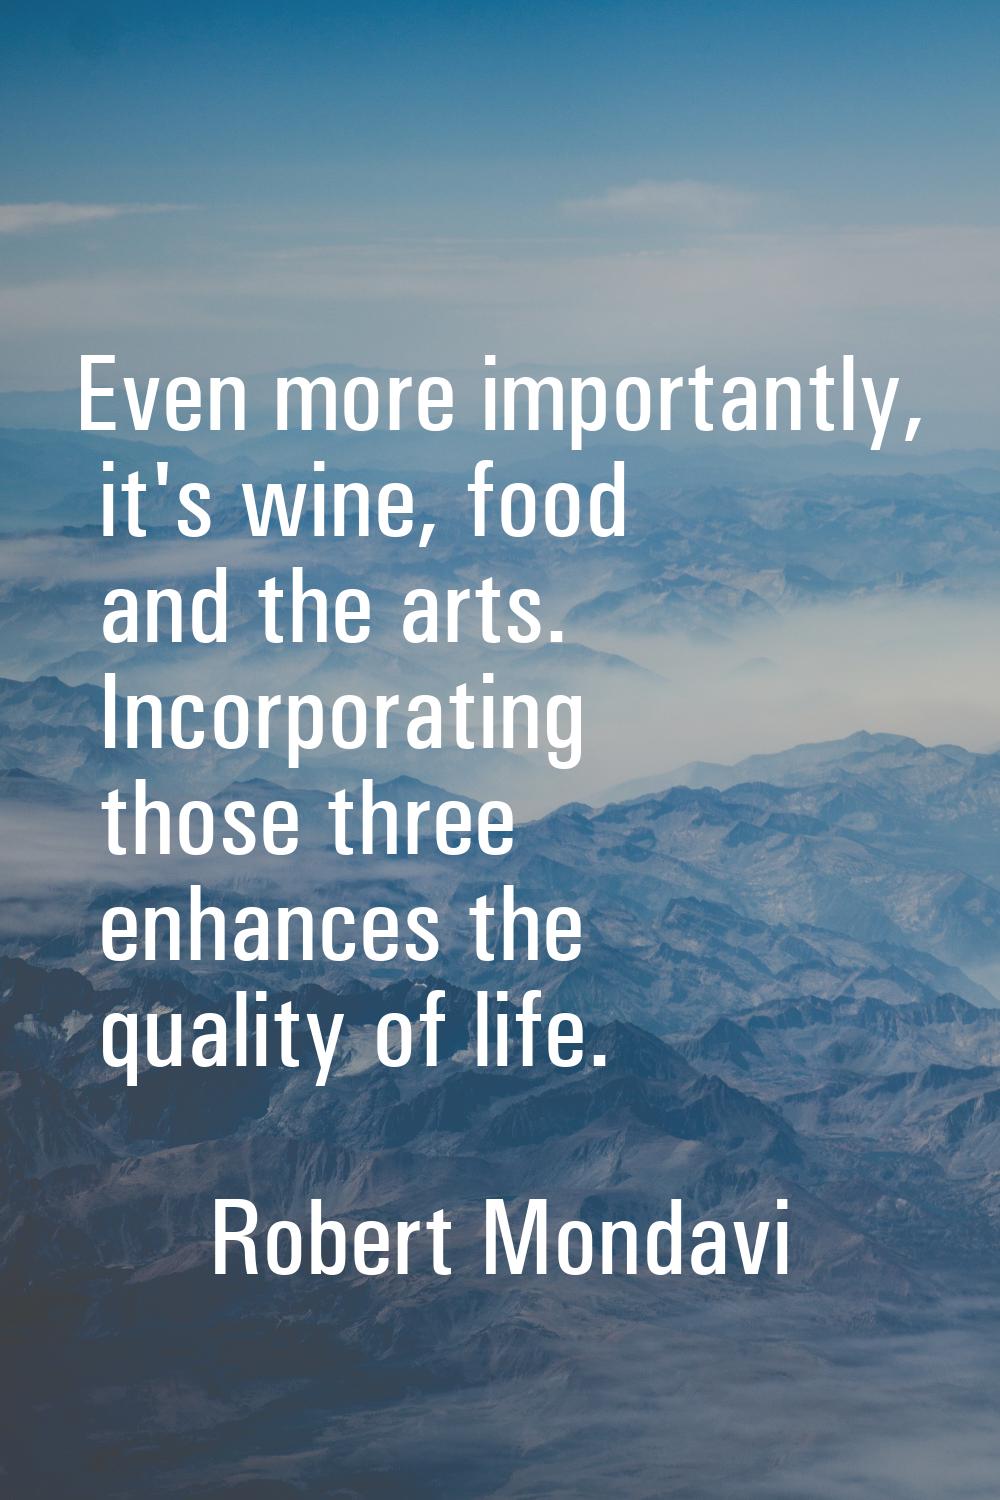 Even more importantly, it's wine, food and the arts. Incorporating those three enhances the quality